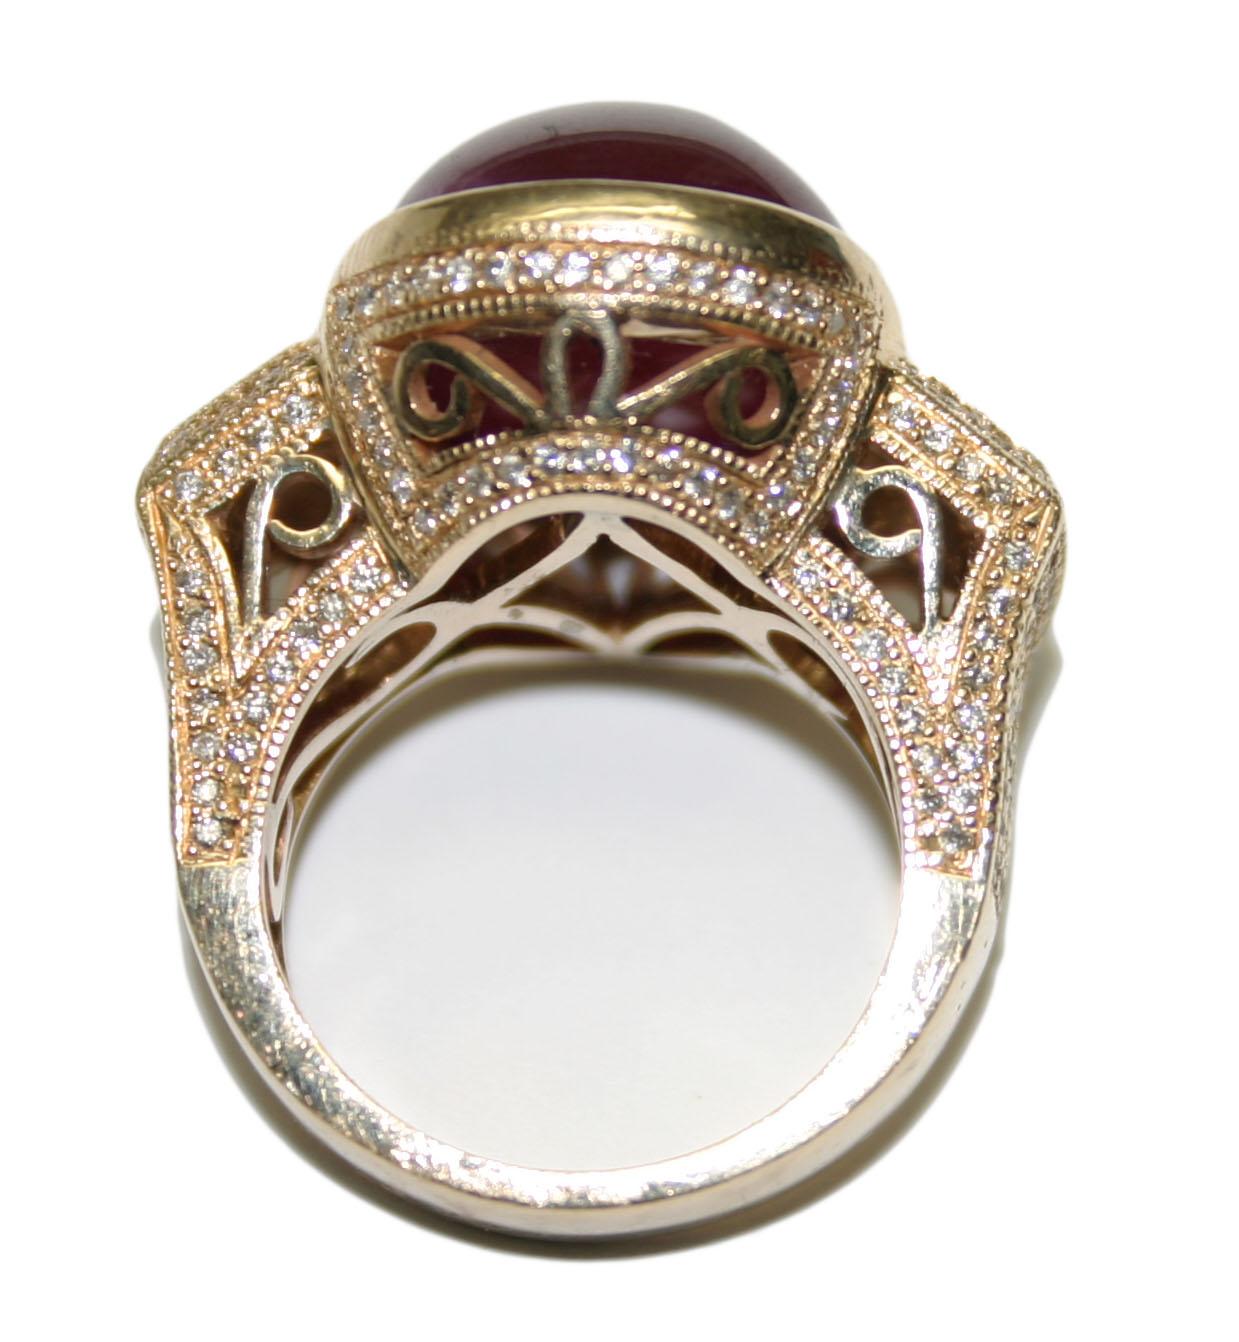 A beautiful workmanship antique design Style 14 karat yellow gold ladies ring with an overall weight of 15 grams.

The center stone is an oval shaped cabochon cut natural ruby (treated) 17 x 13.5mm, surrounded by small round brilliant diamonds